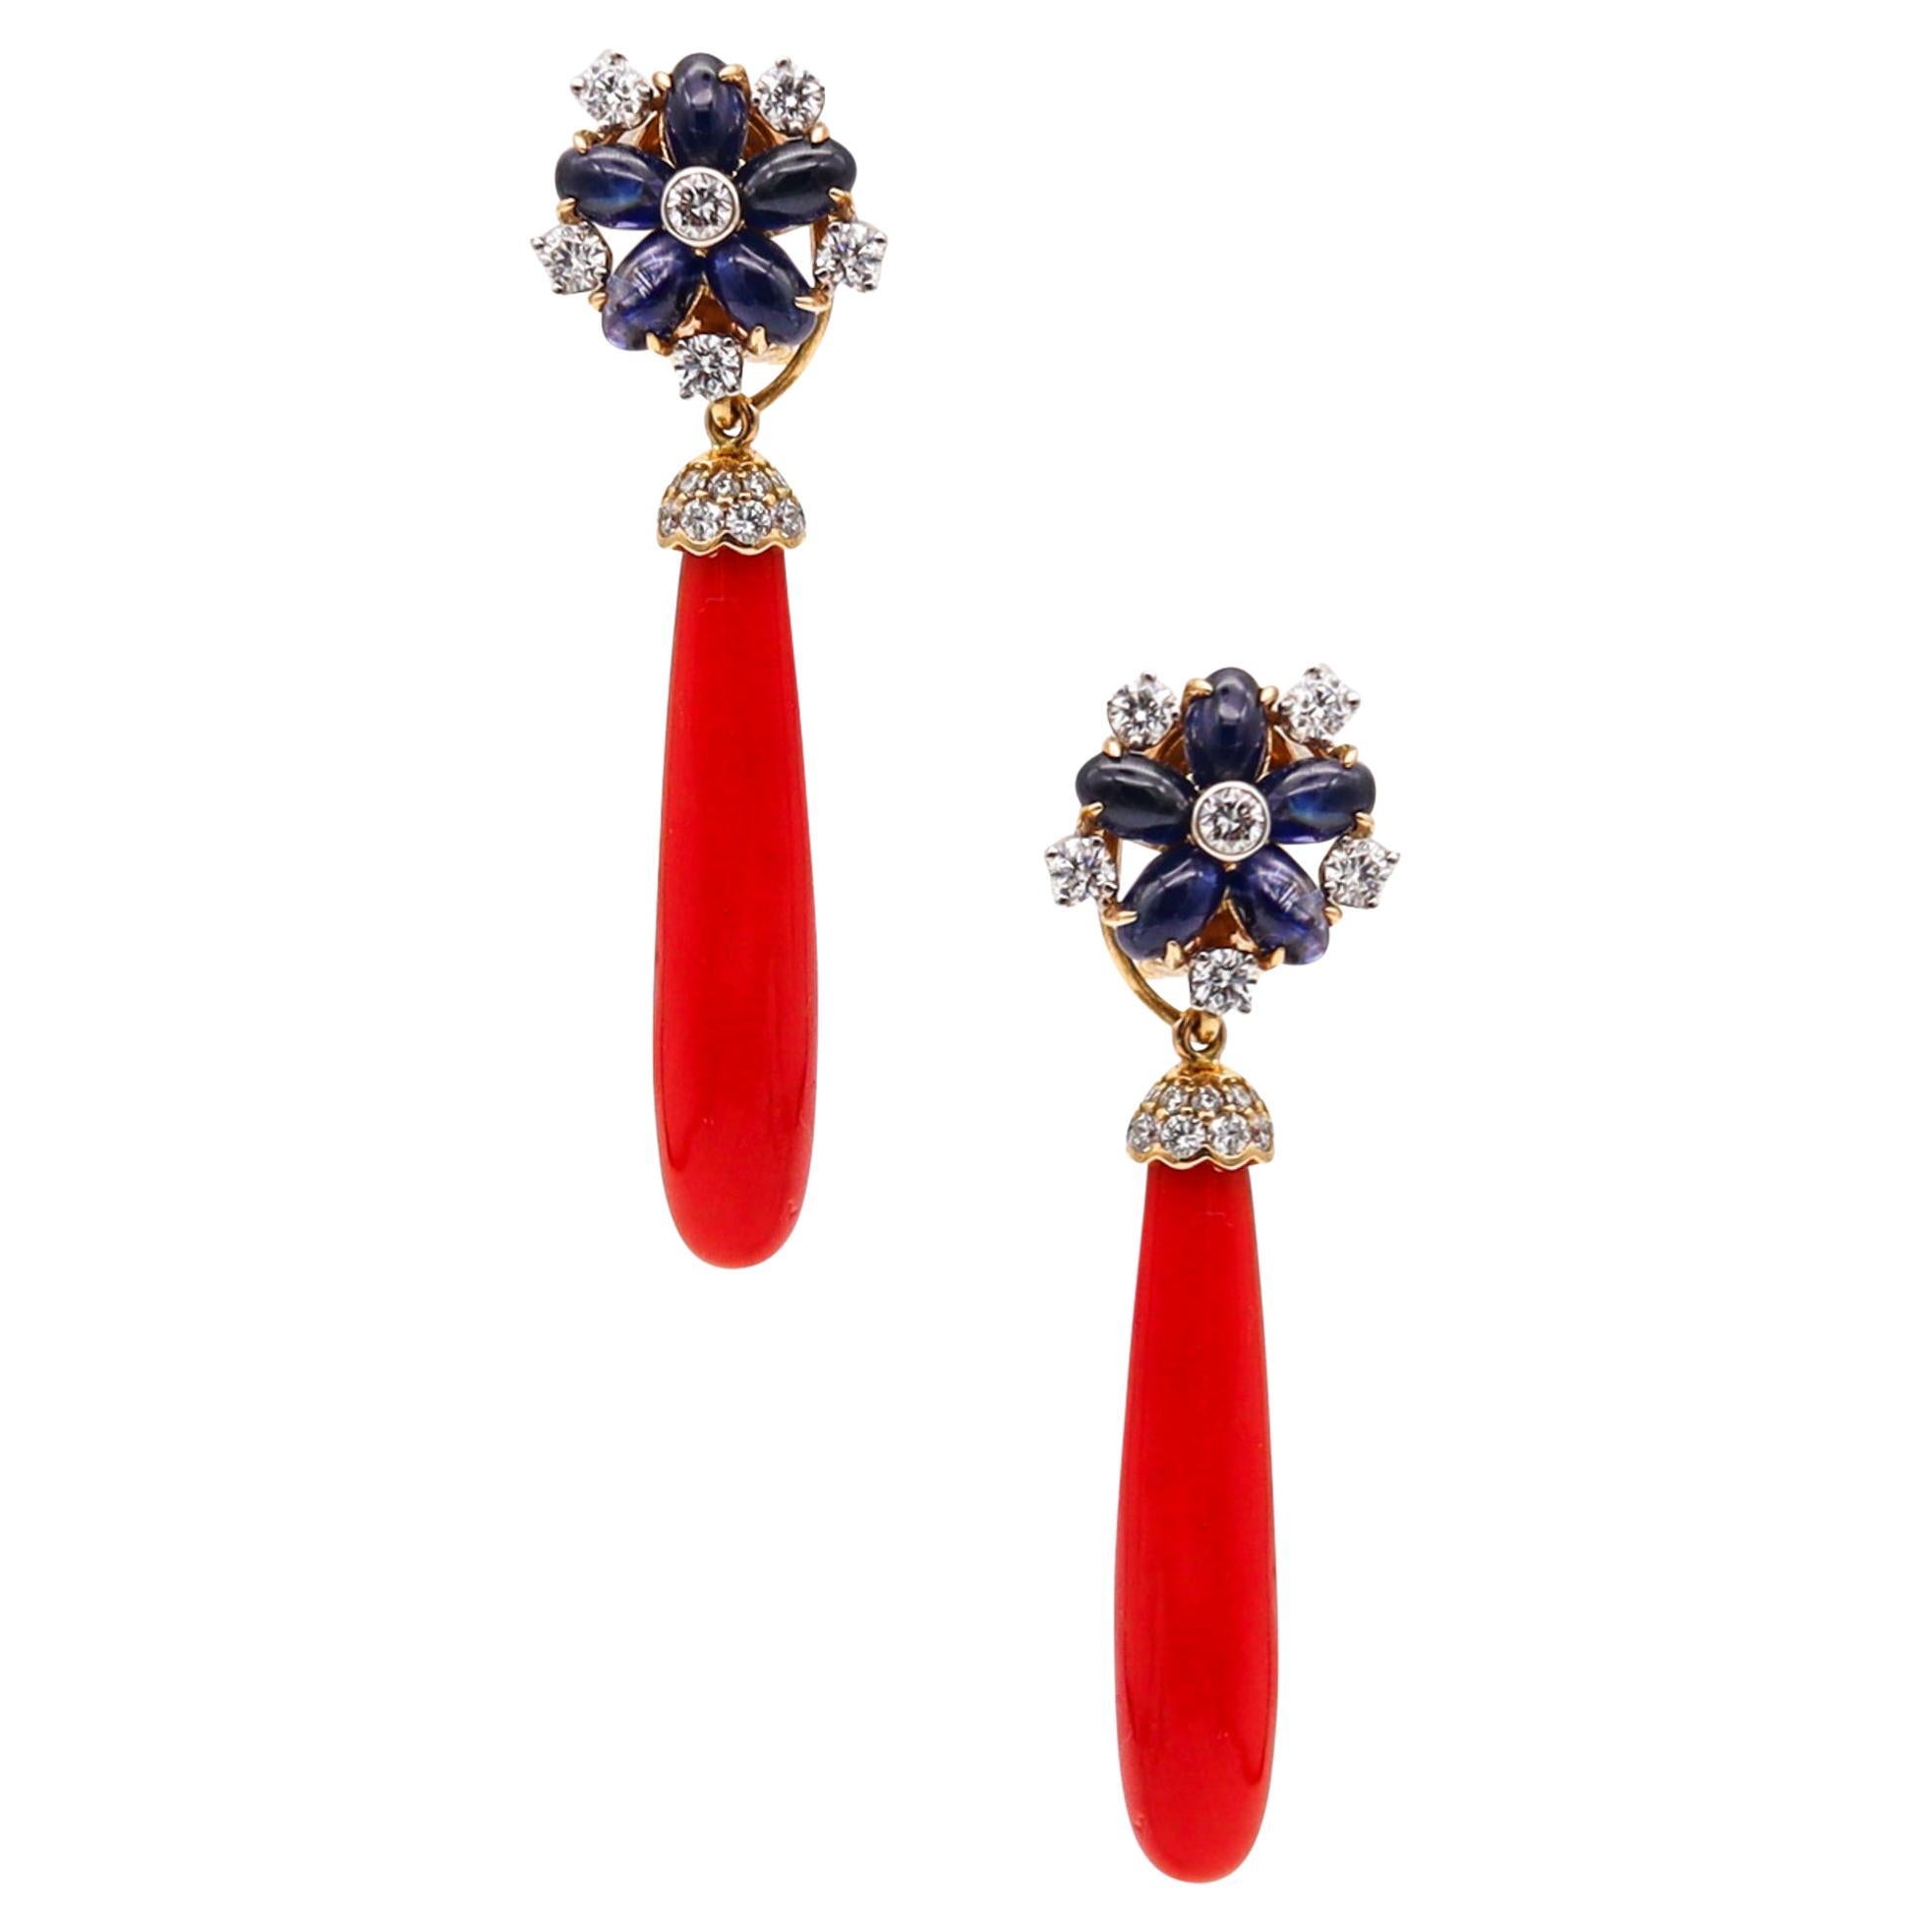 Aletto Brothers Convertible Dangle Earrings 18Kt Gold 21.73 Ctw Diamonds & Coral